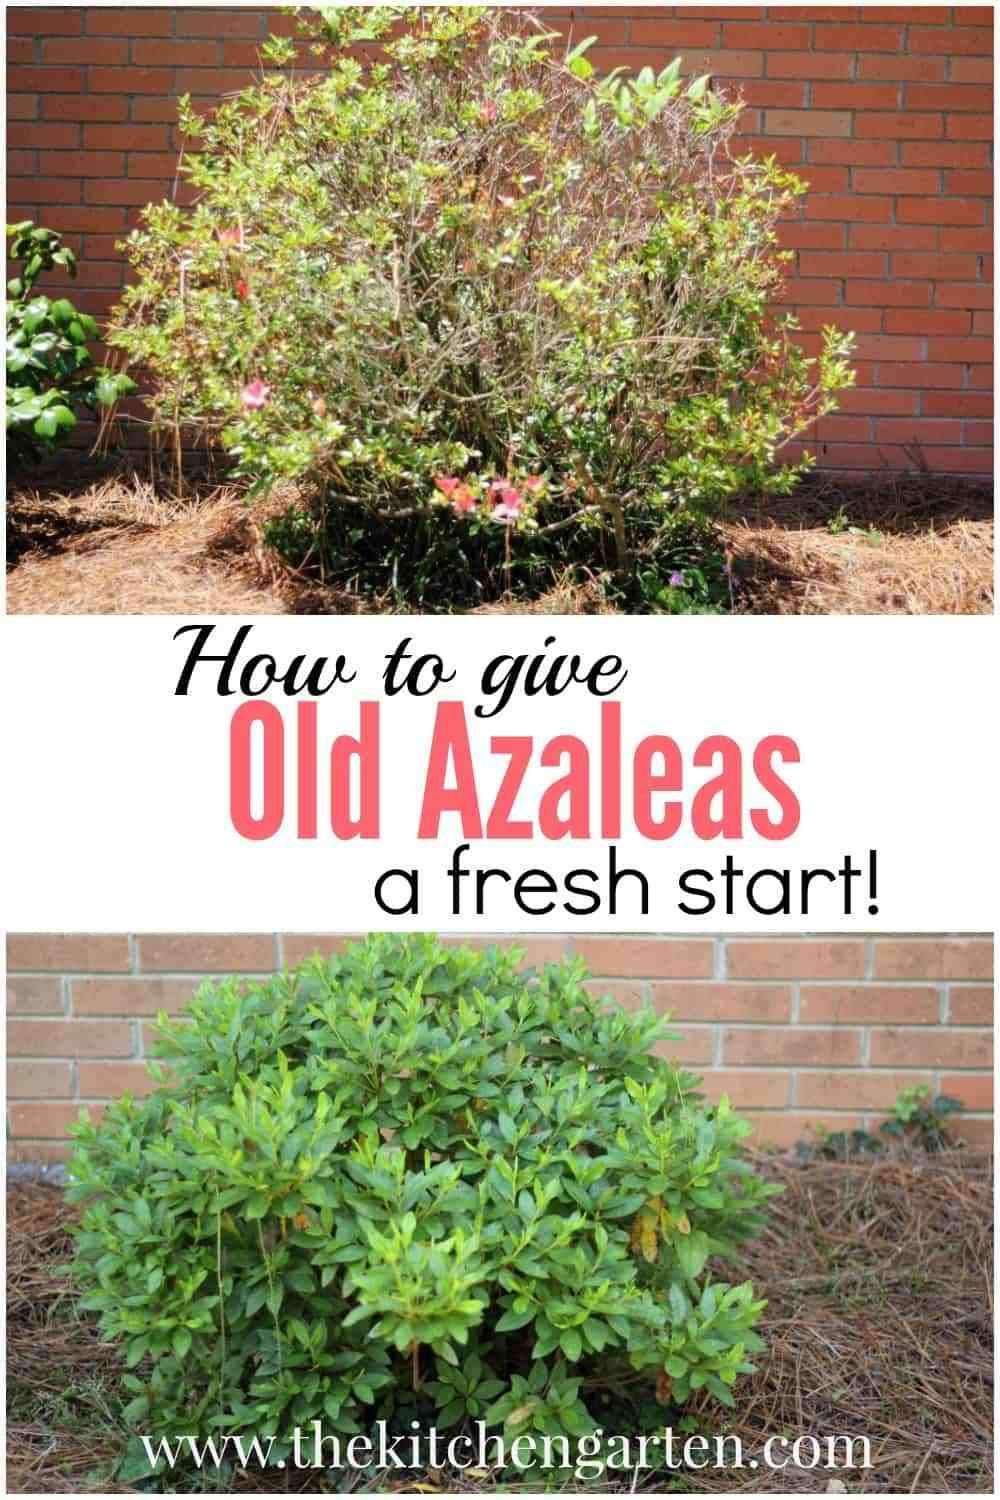 Pruning azaleas can give tired, old azalea plants a fresh start. All it takes…